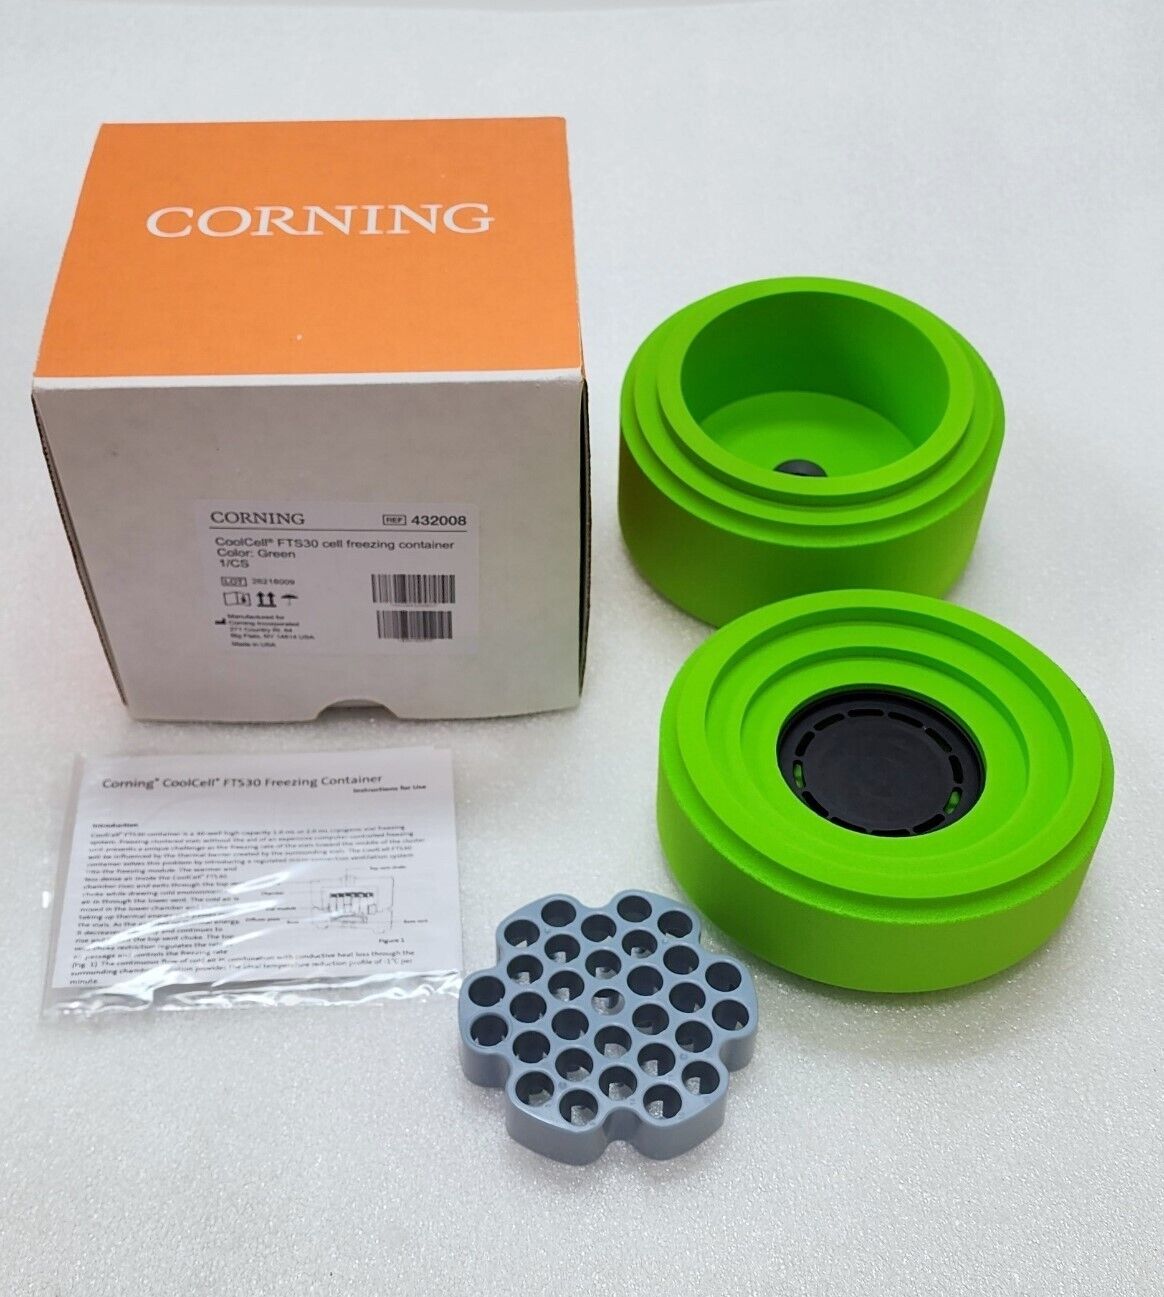 Corning CoolCell FTS30, Freezing Container for 30 x 1 mL or 2 mL Cryogenic Vials